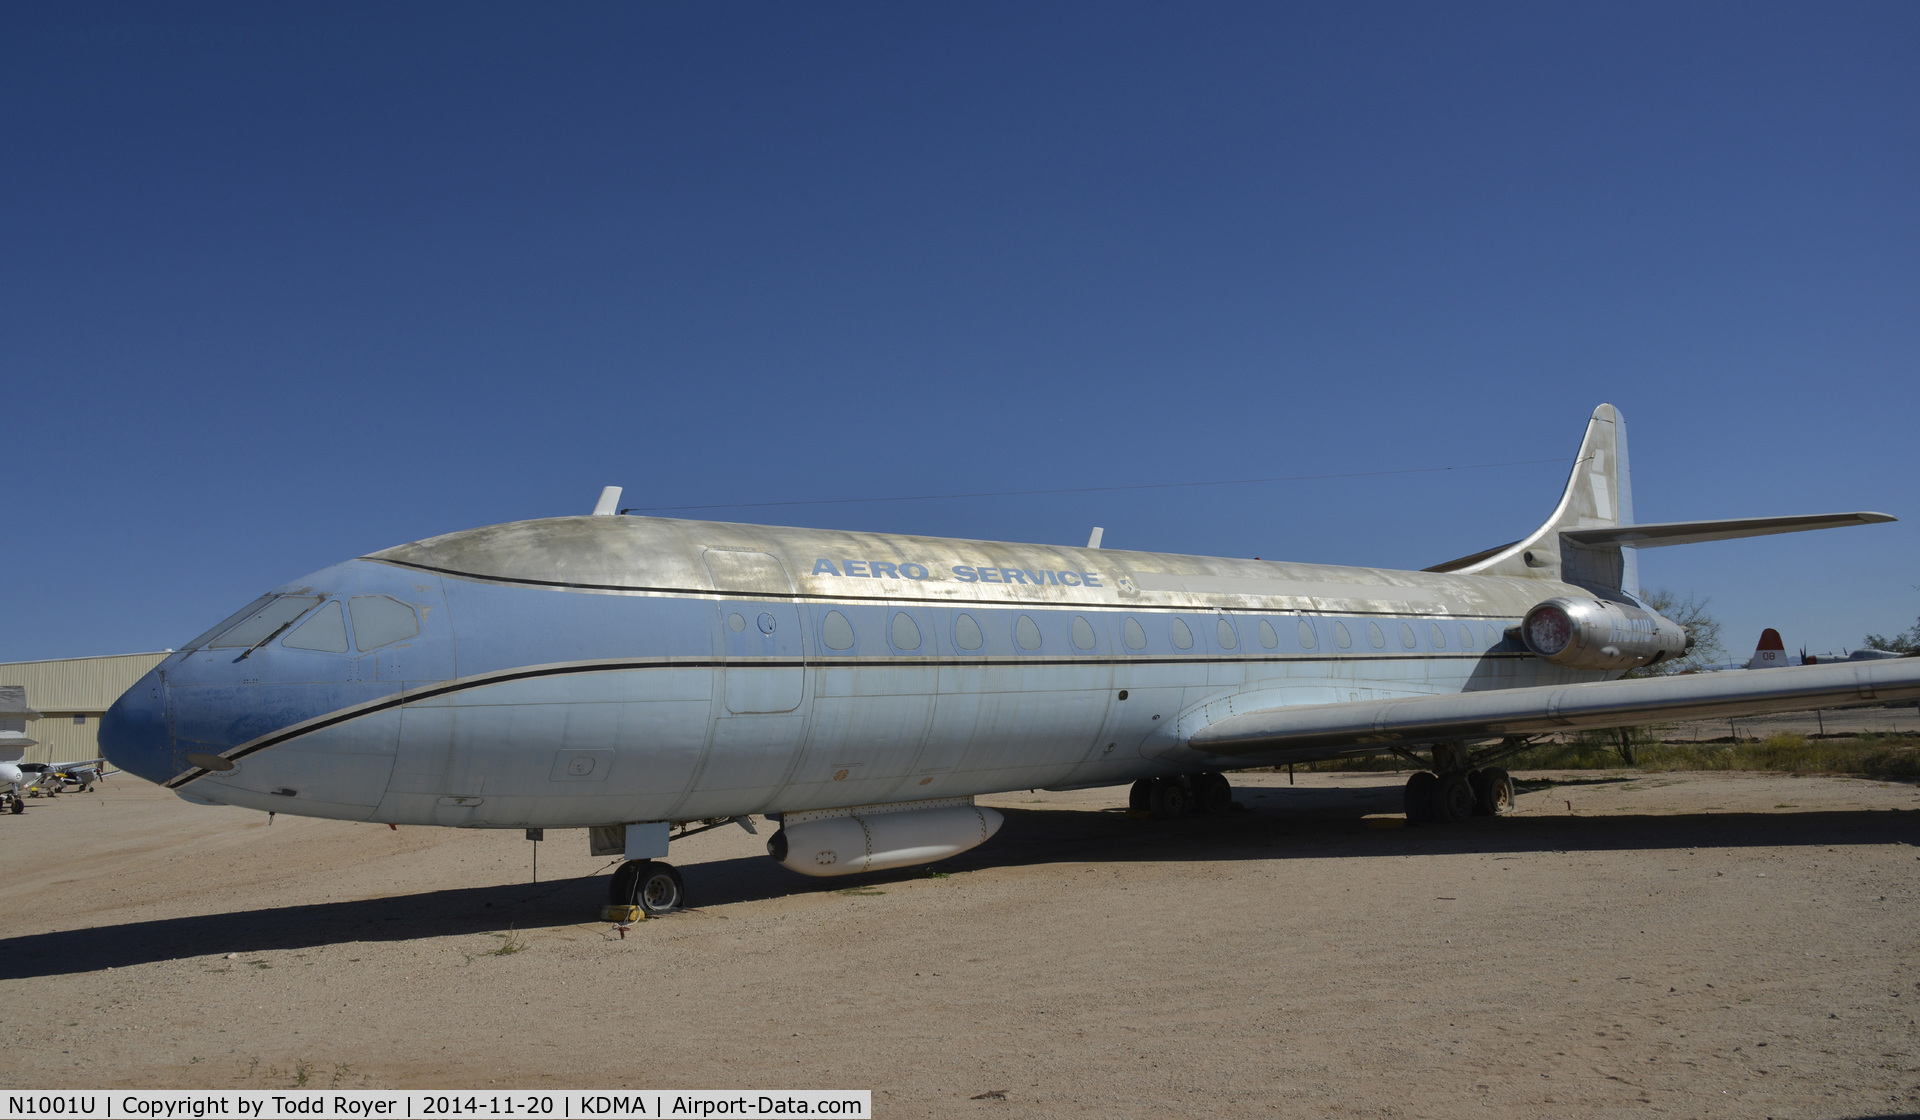 N1001U, 1961 Sud Aviation SE-210 Caravelle VI-R C/N 86, On display at the Pima Air and Space Museum